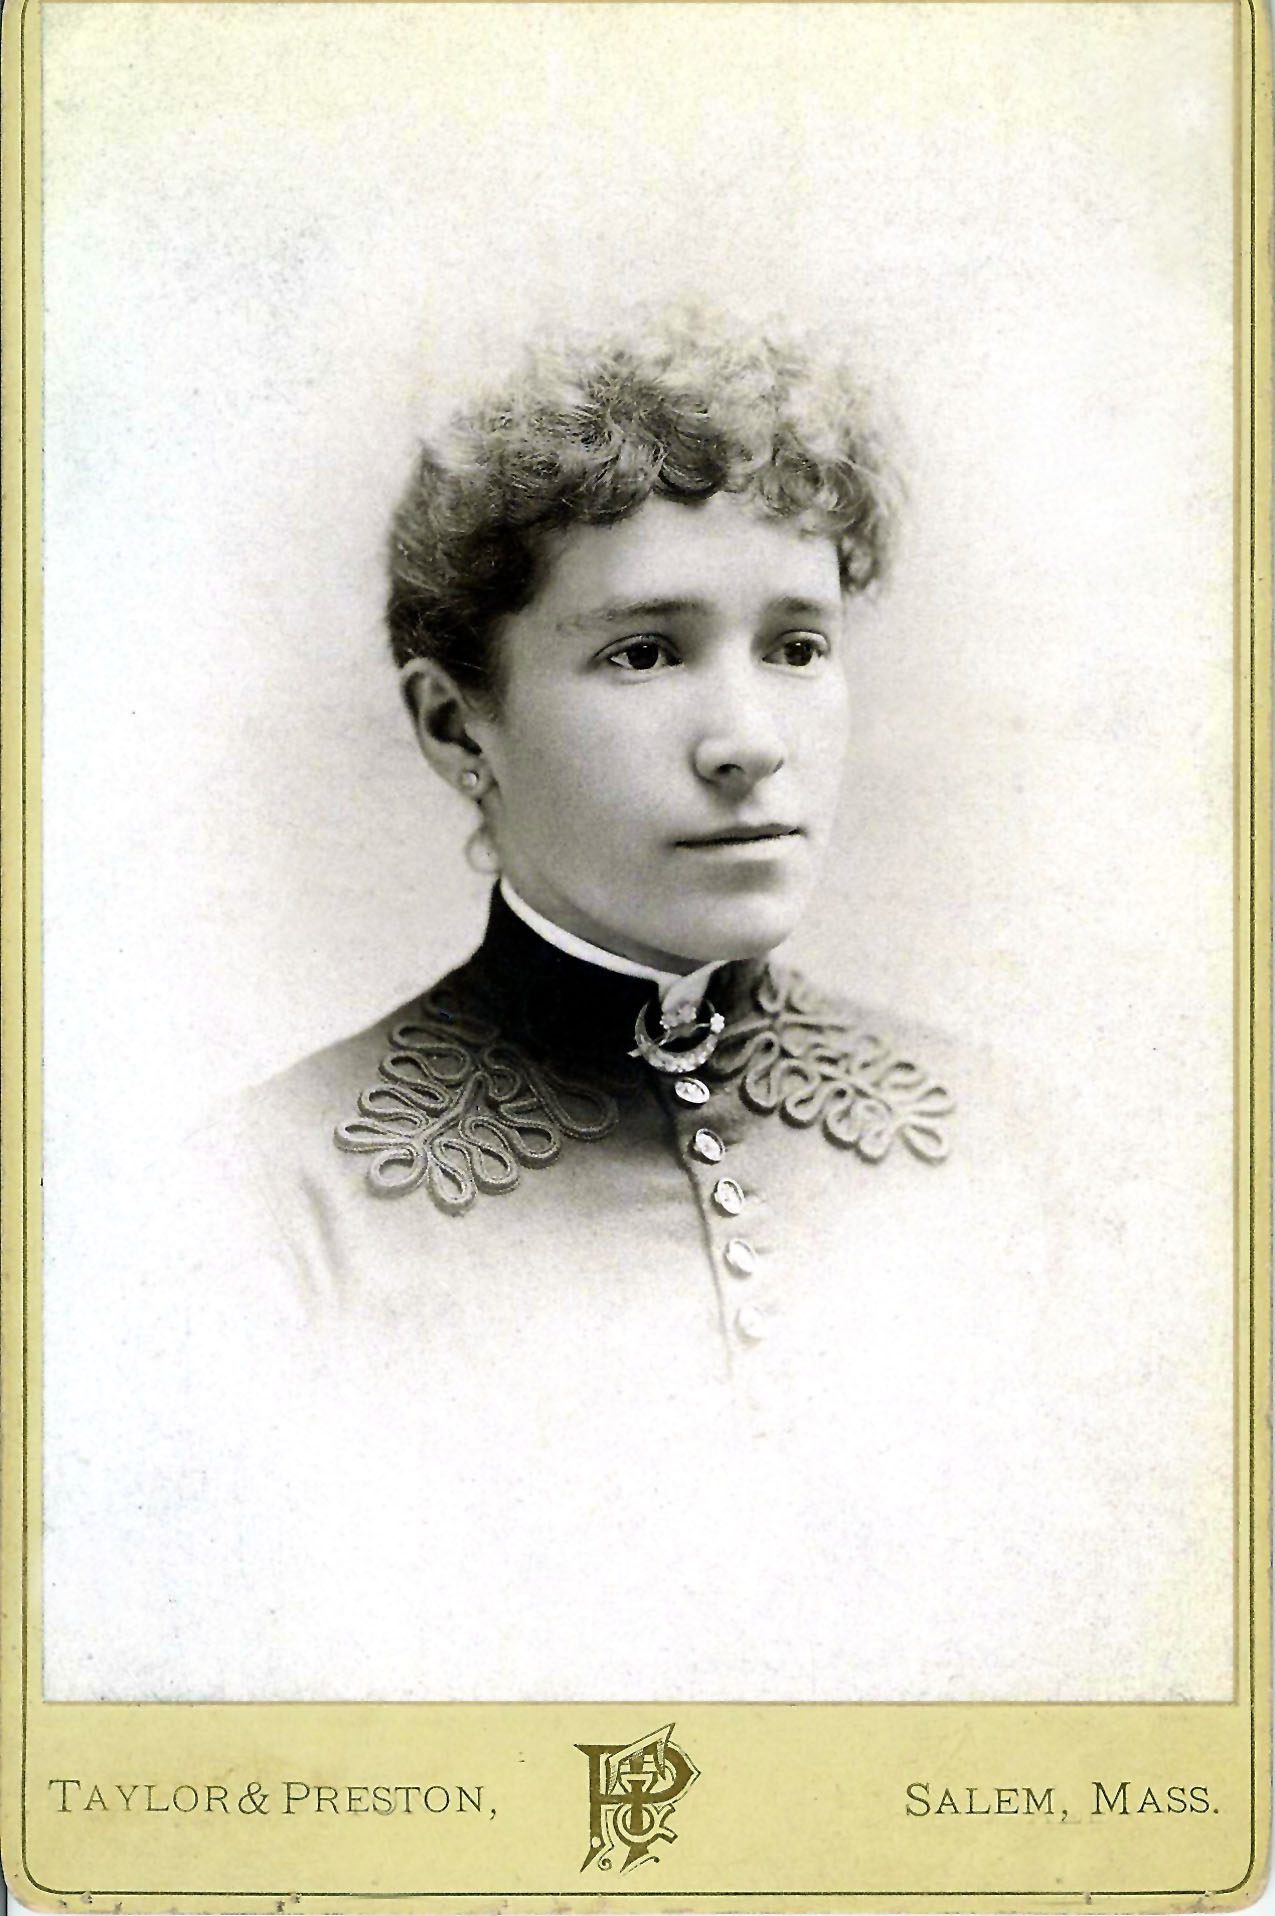 Photo of Isabelle Friend Bevins as a young woman.